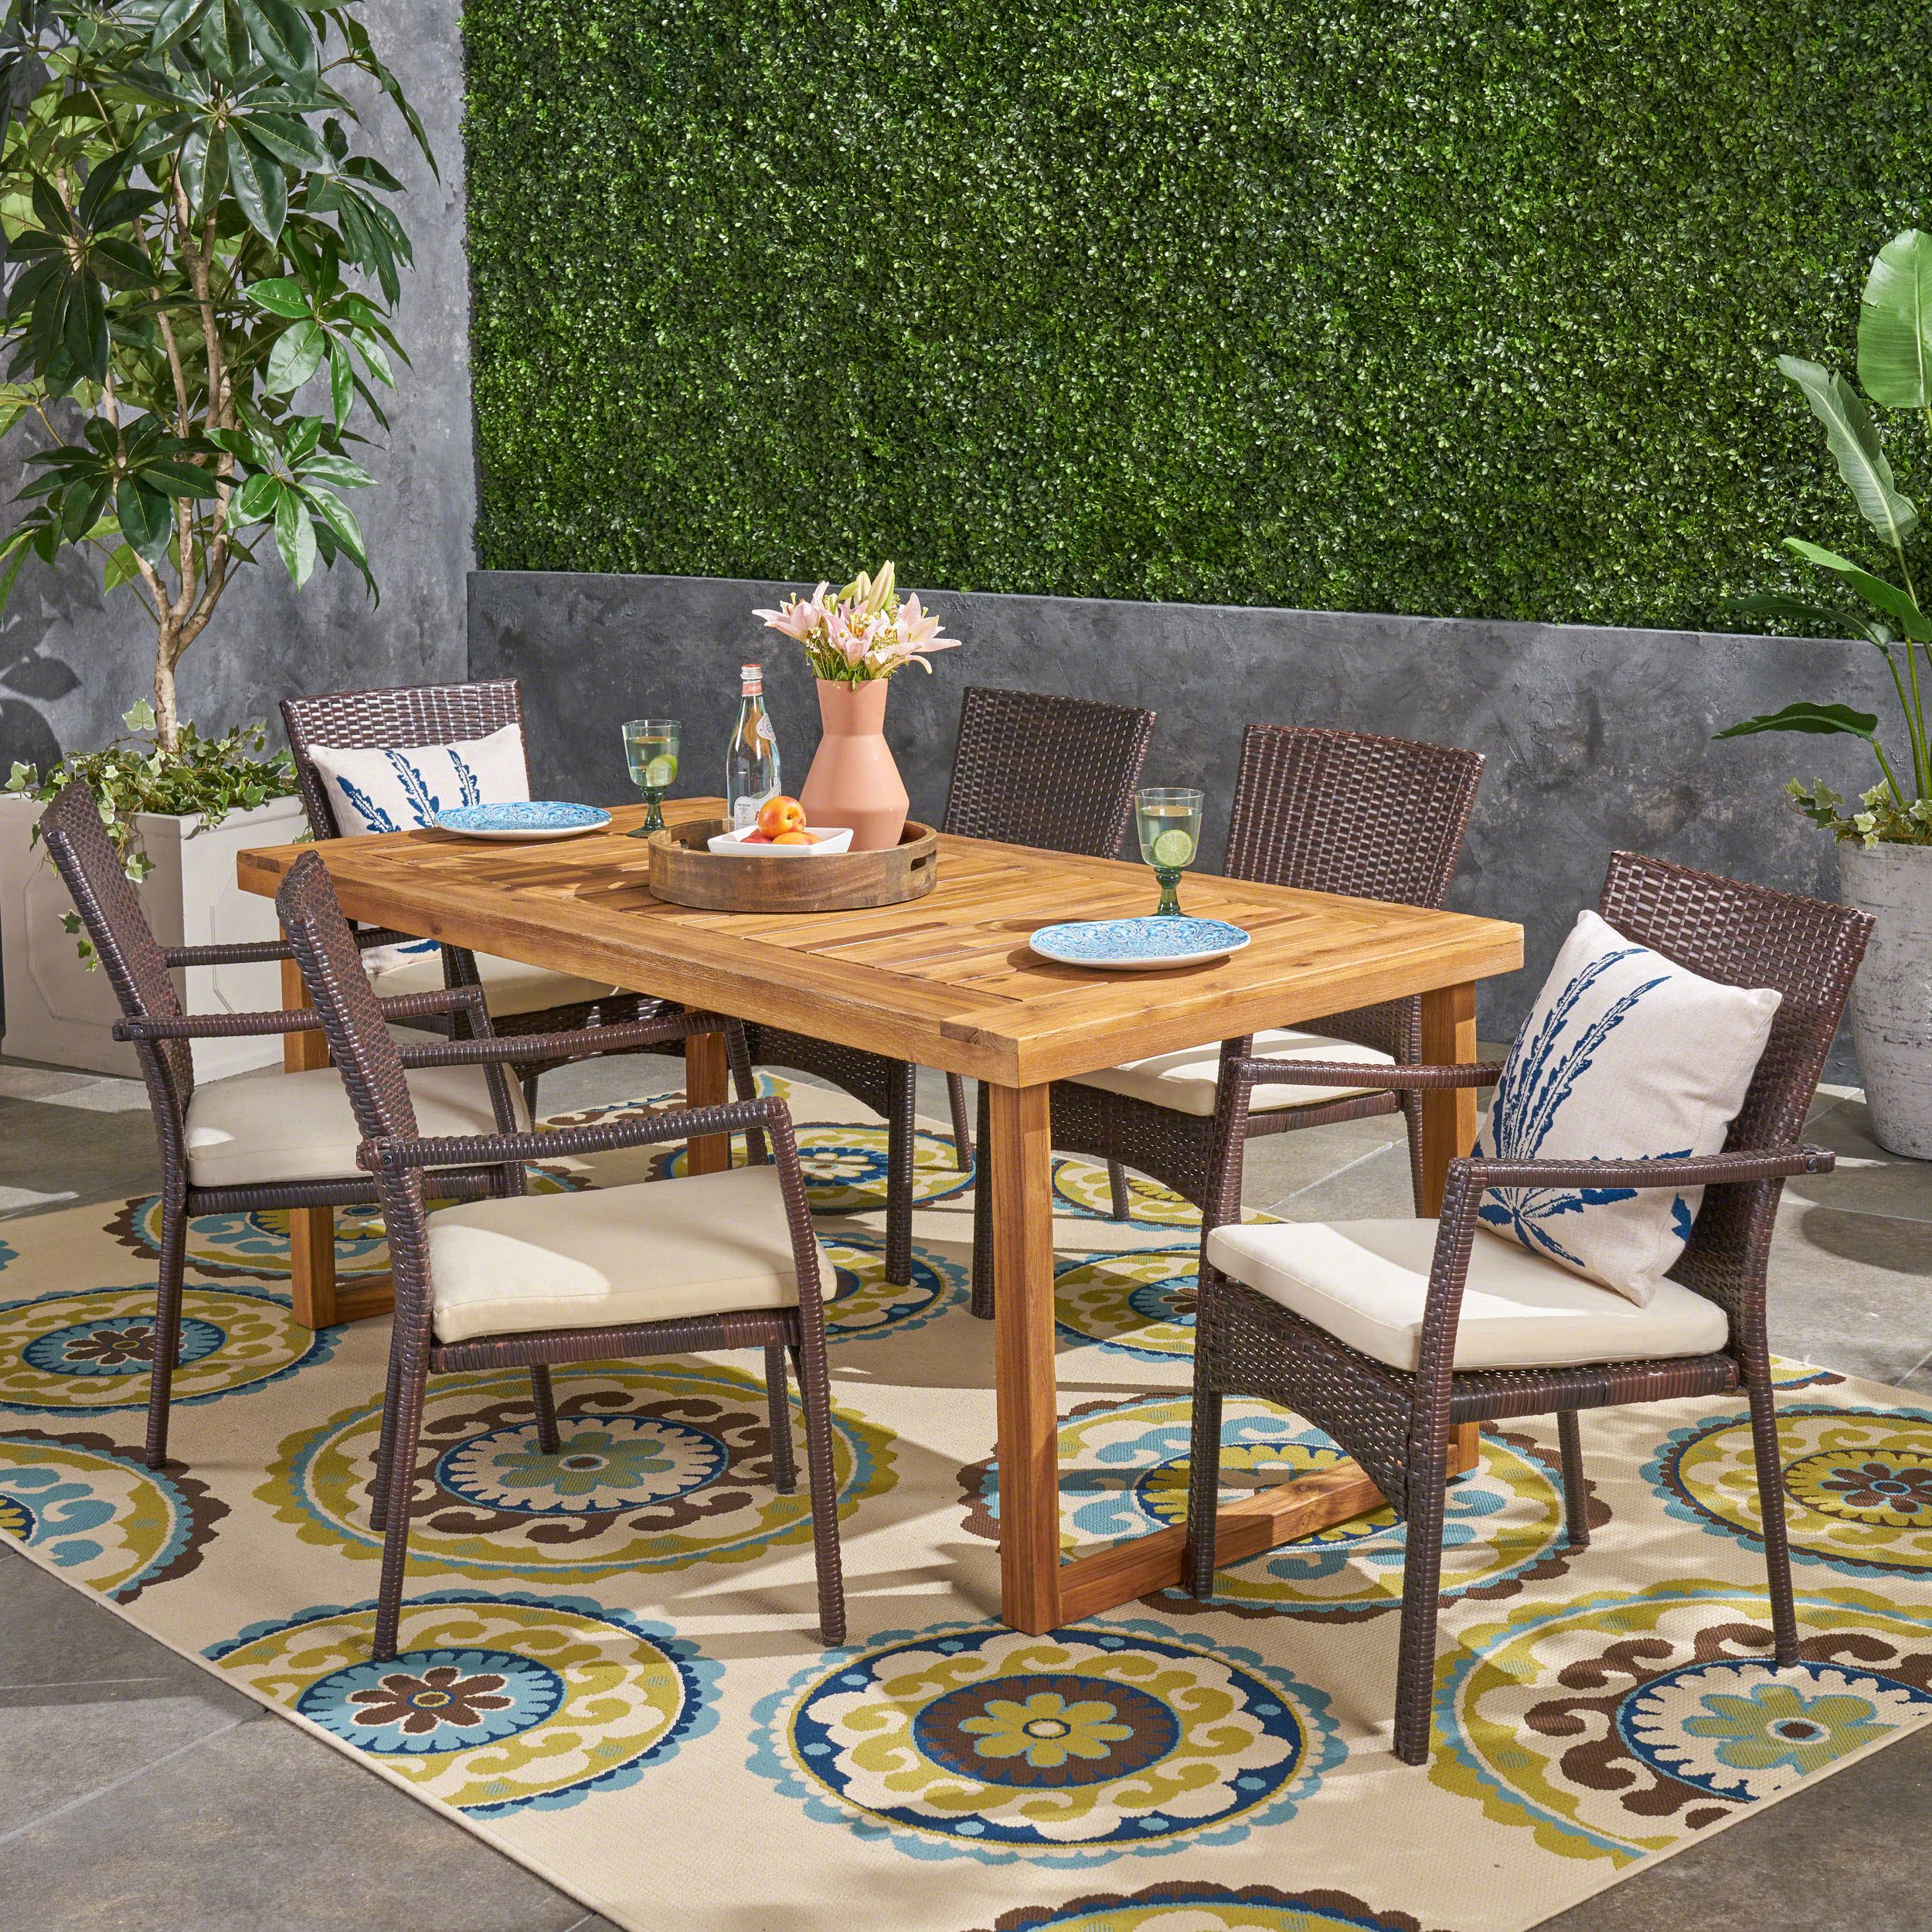 Preferred Lily Outdoor 7 Piece Acacia Wood Dining Set With Wicker Chairs And Regarding 7 Piece Patio Dining Sets (View 1 of 15)